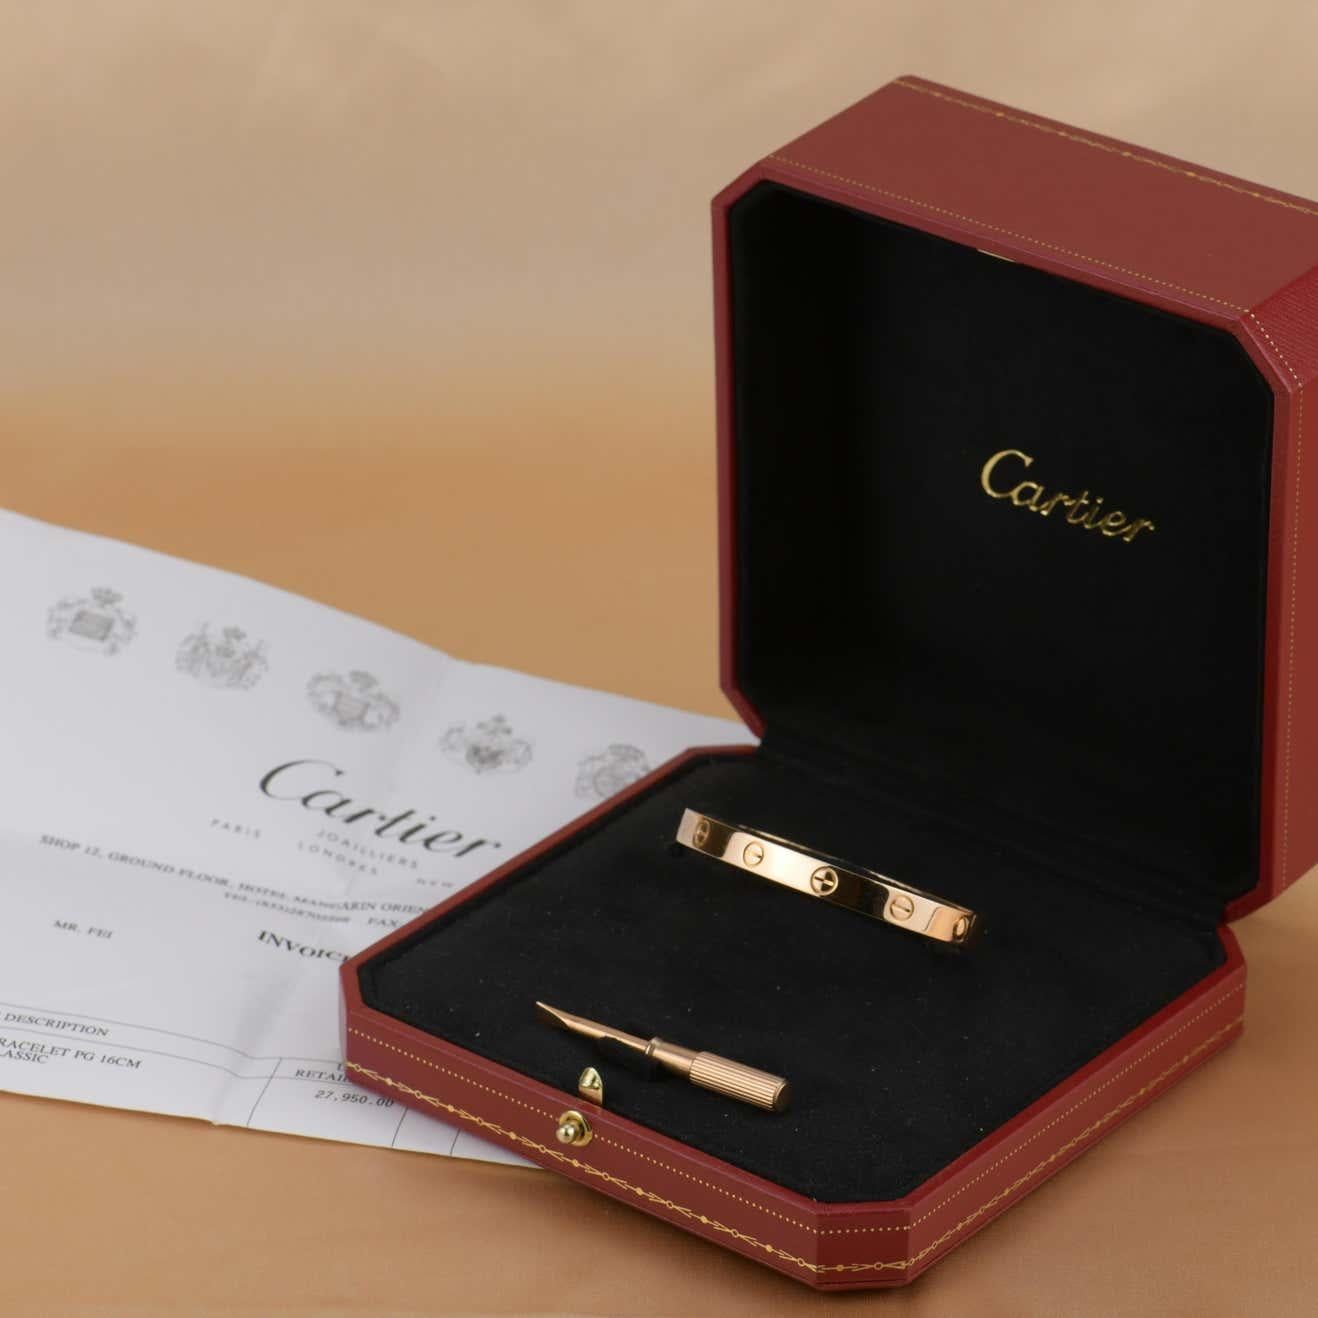 This LOVE bracelet is a classic Cartier offering. The simple bangle is made with 18K rose gold and features the iconic Cartier screw motif and features a new mechanism. The inside of the bangle is inscribed with the brand name. The bracelet has